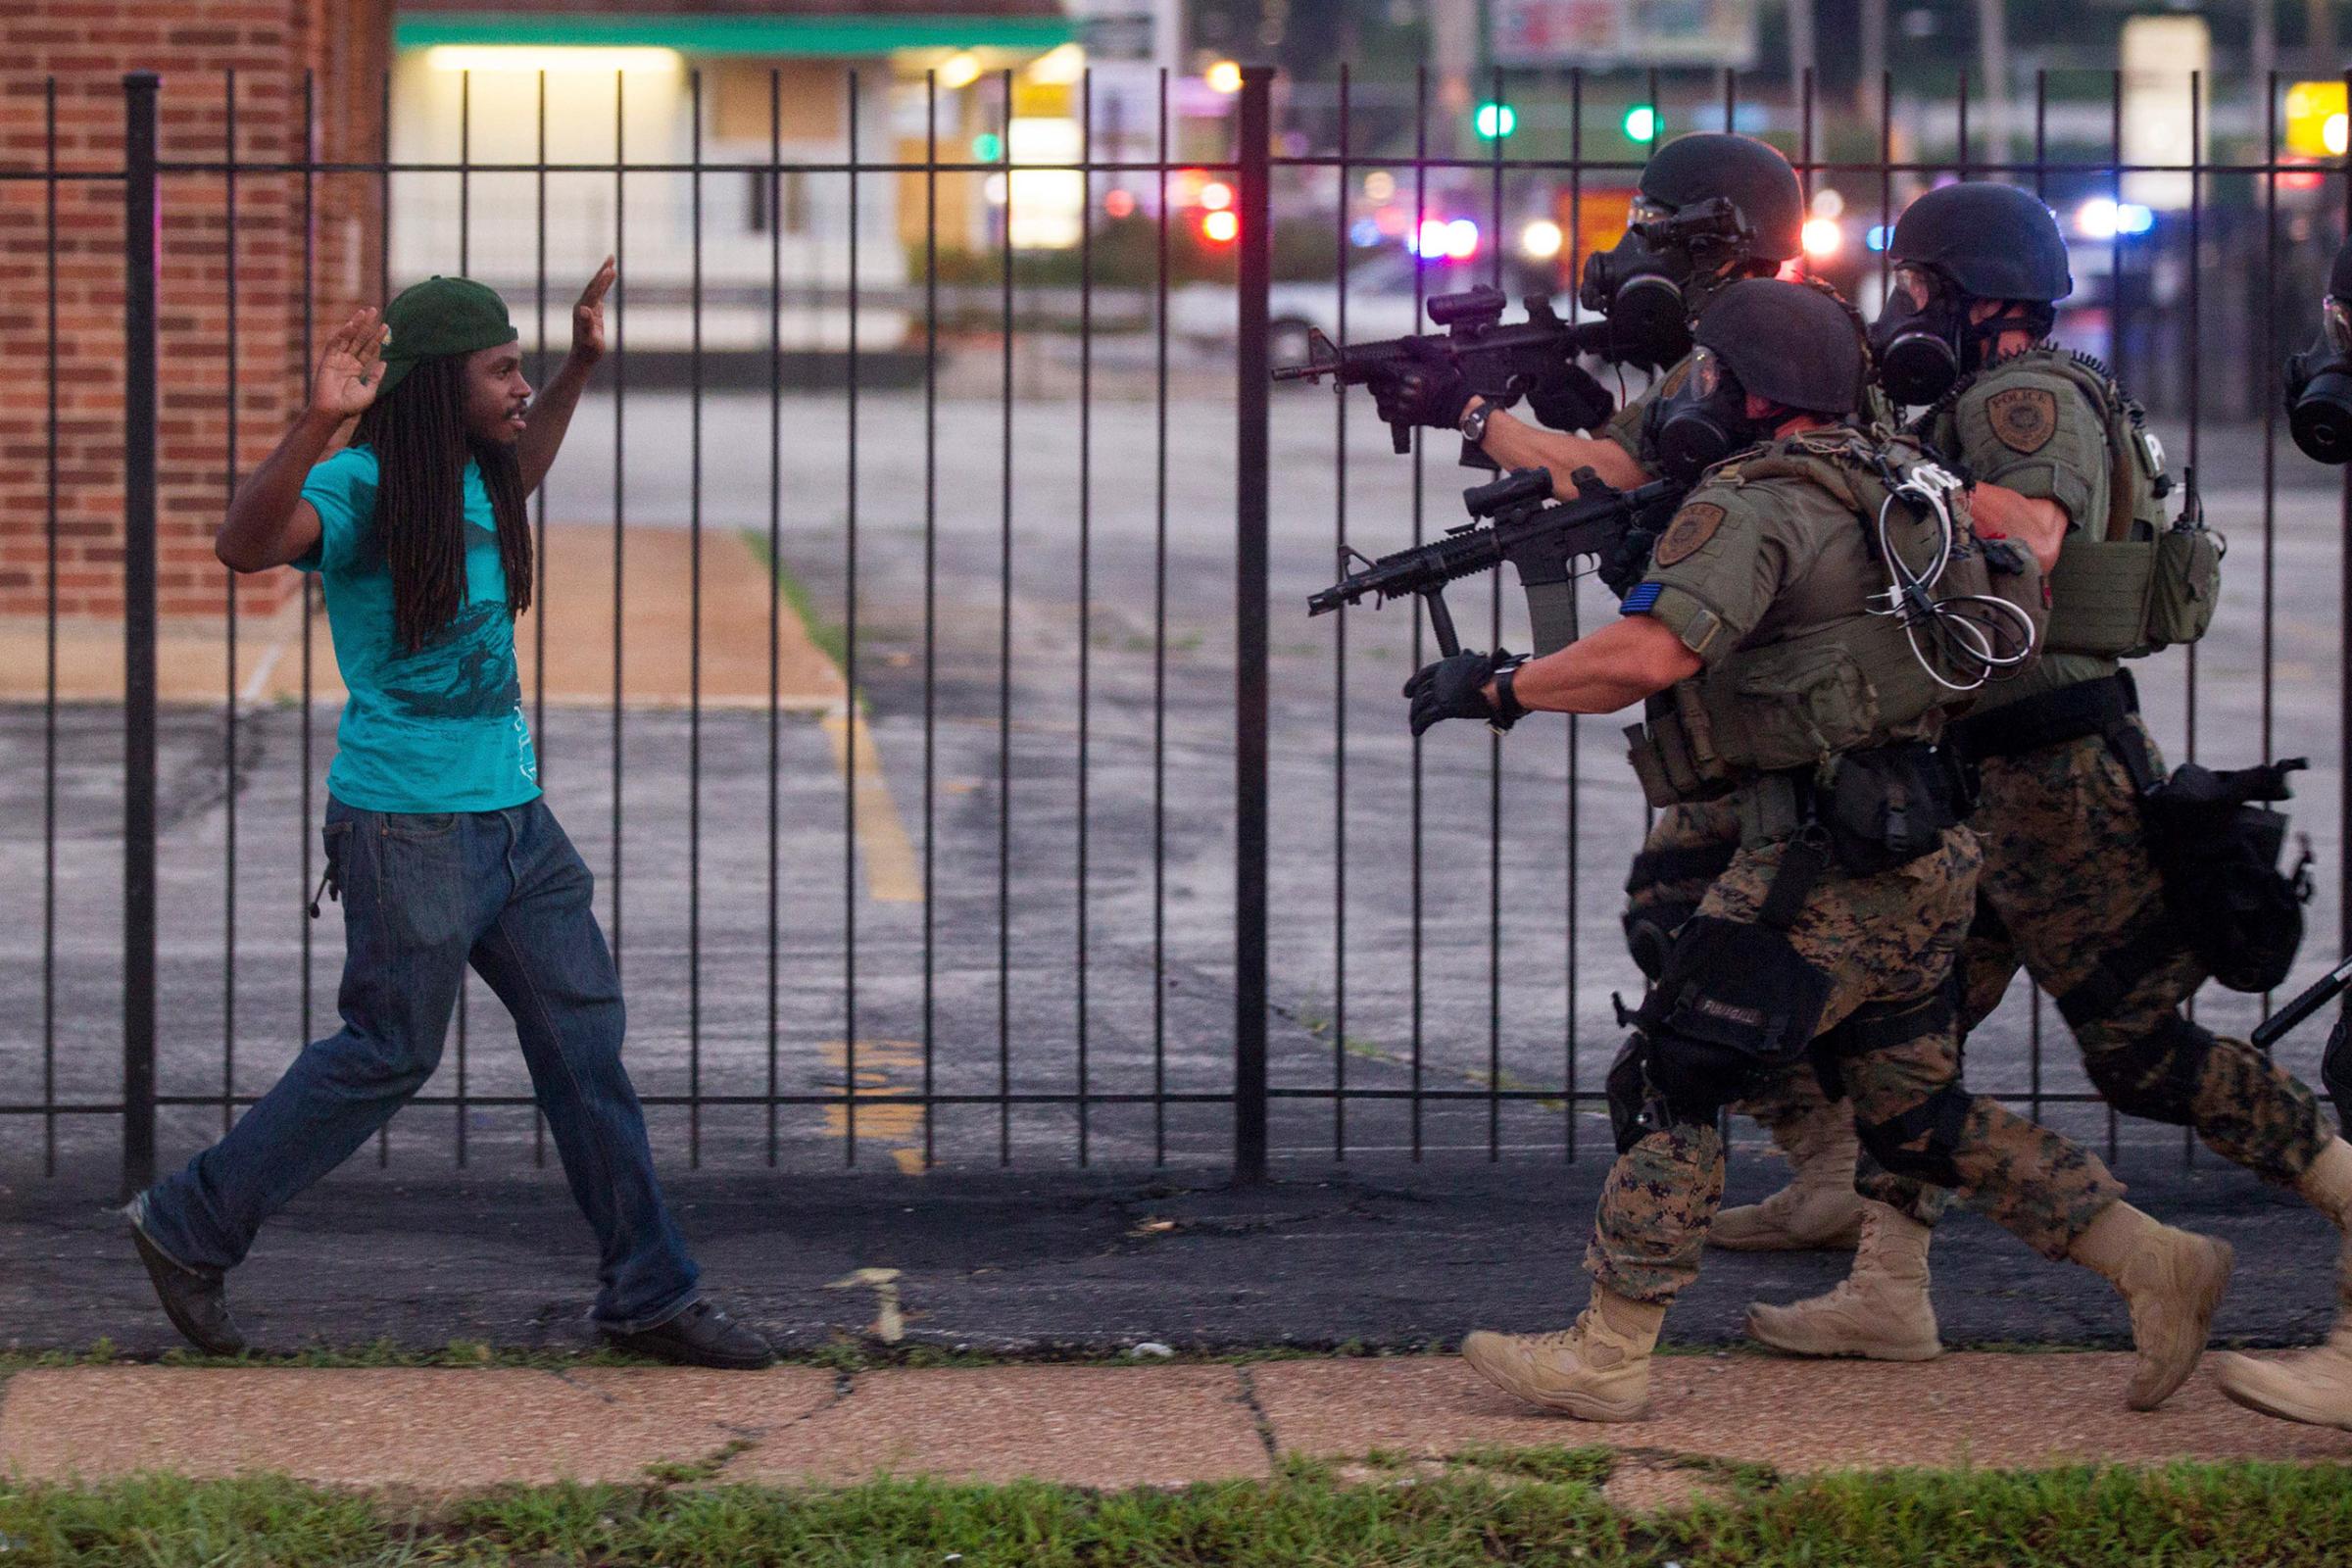 Heavily armed and equipped police confront, and eventually detain, a man during protests two days after the fatal shooting of Michael Brown, in Ferguson.